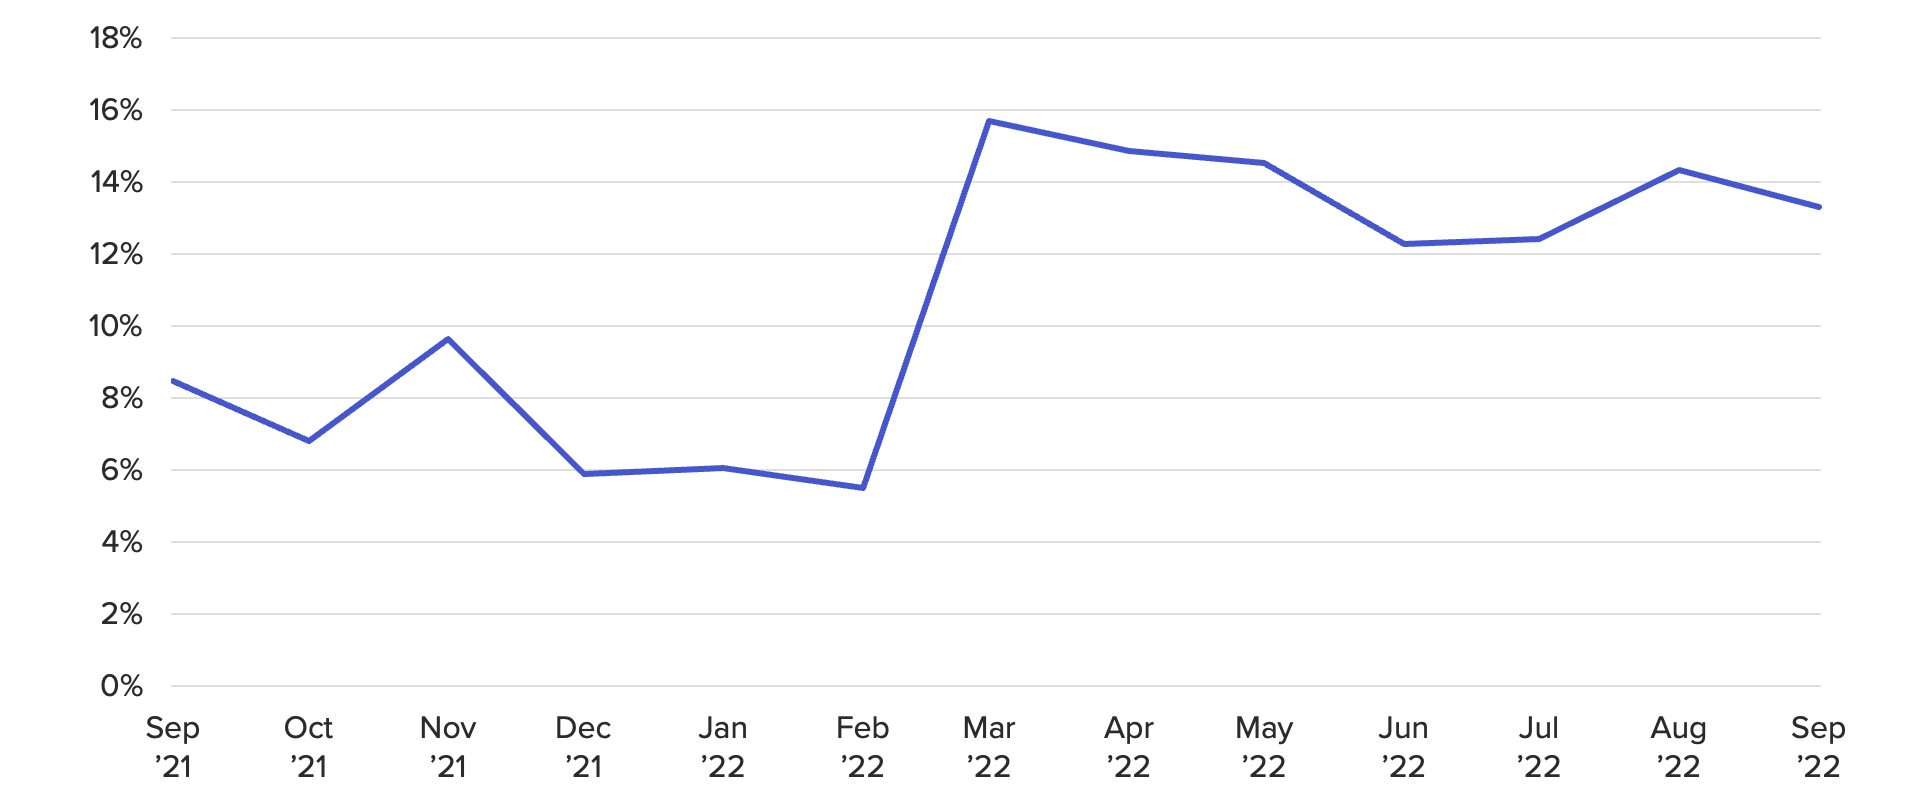 Line chart showing the share of Russian adults reporting having trouble finding specific types of groceries and food has increased in the six months after the Ukraine invasion.